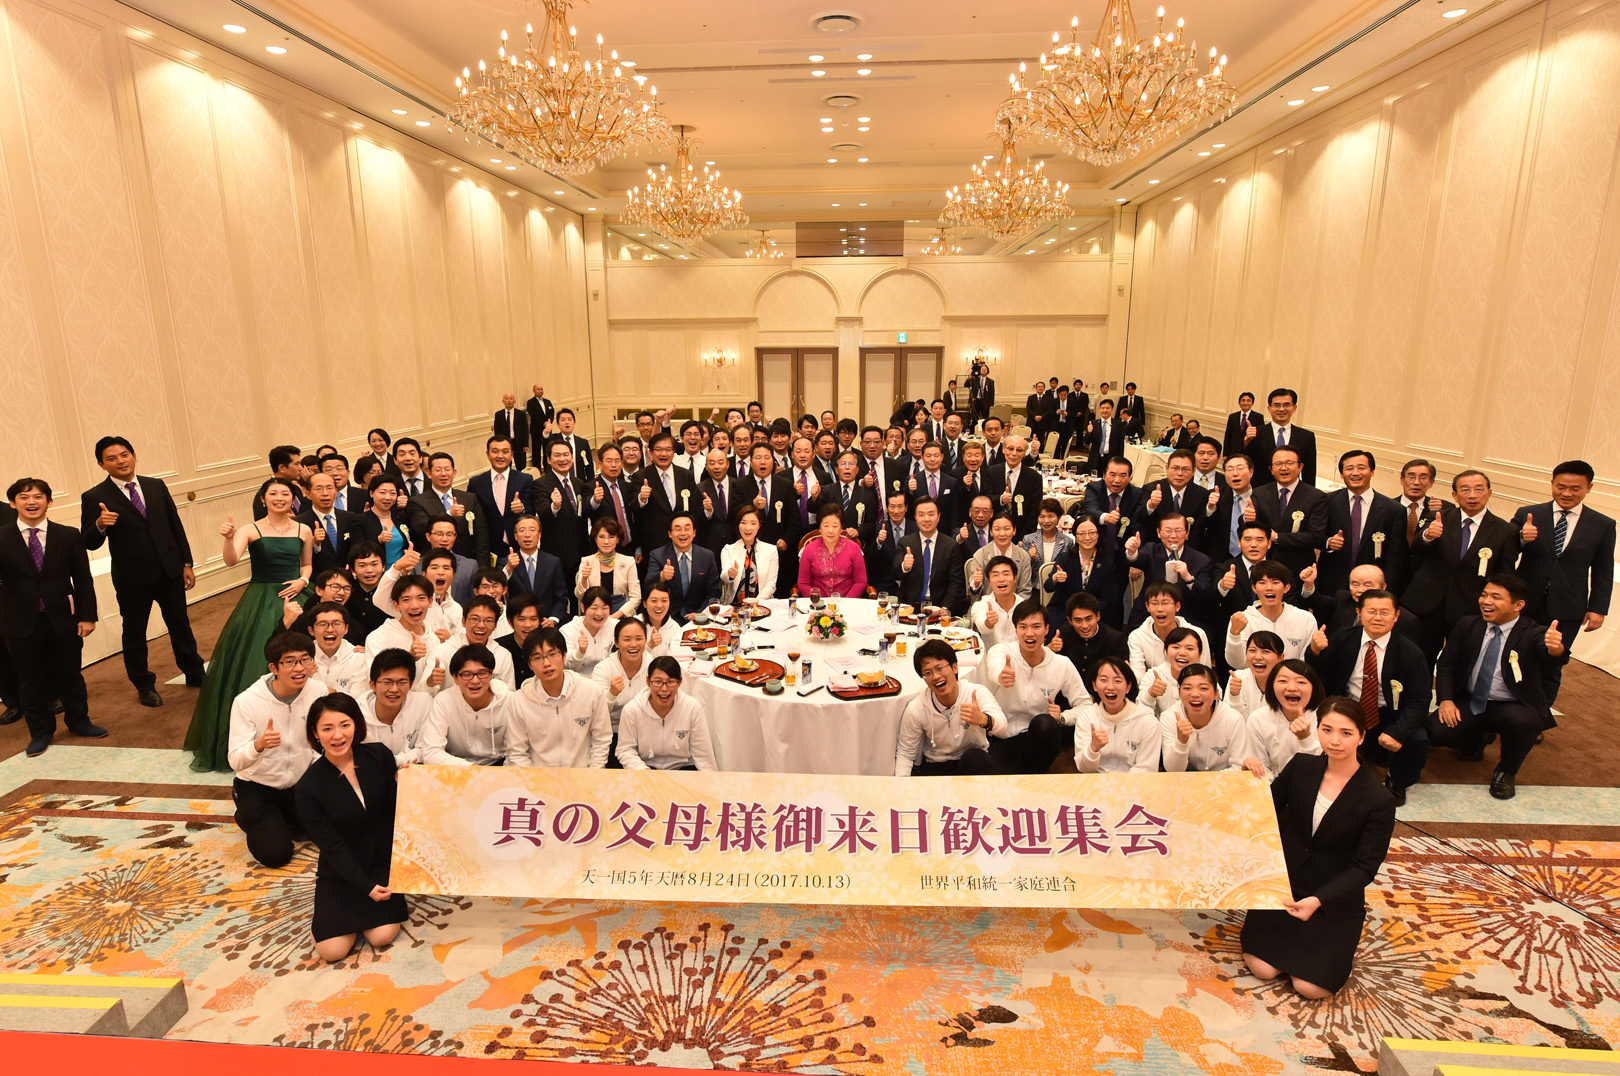 Gathering to Welcome True Parents to Japan (10/13/2017)